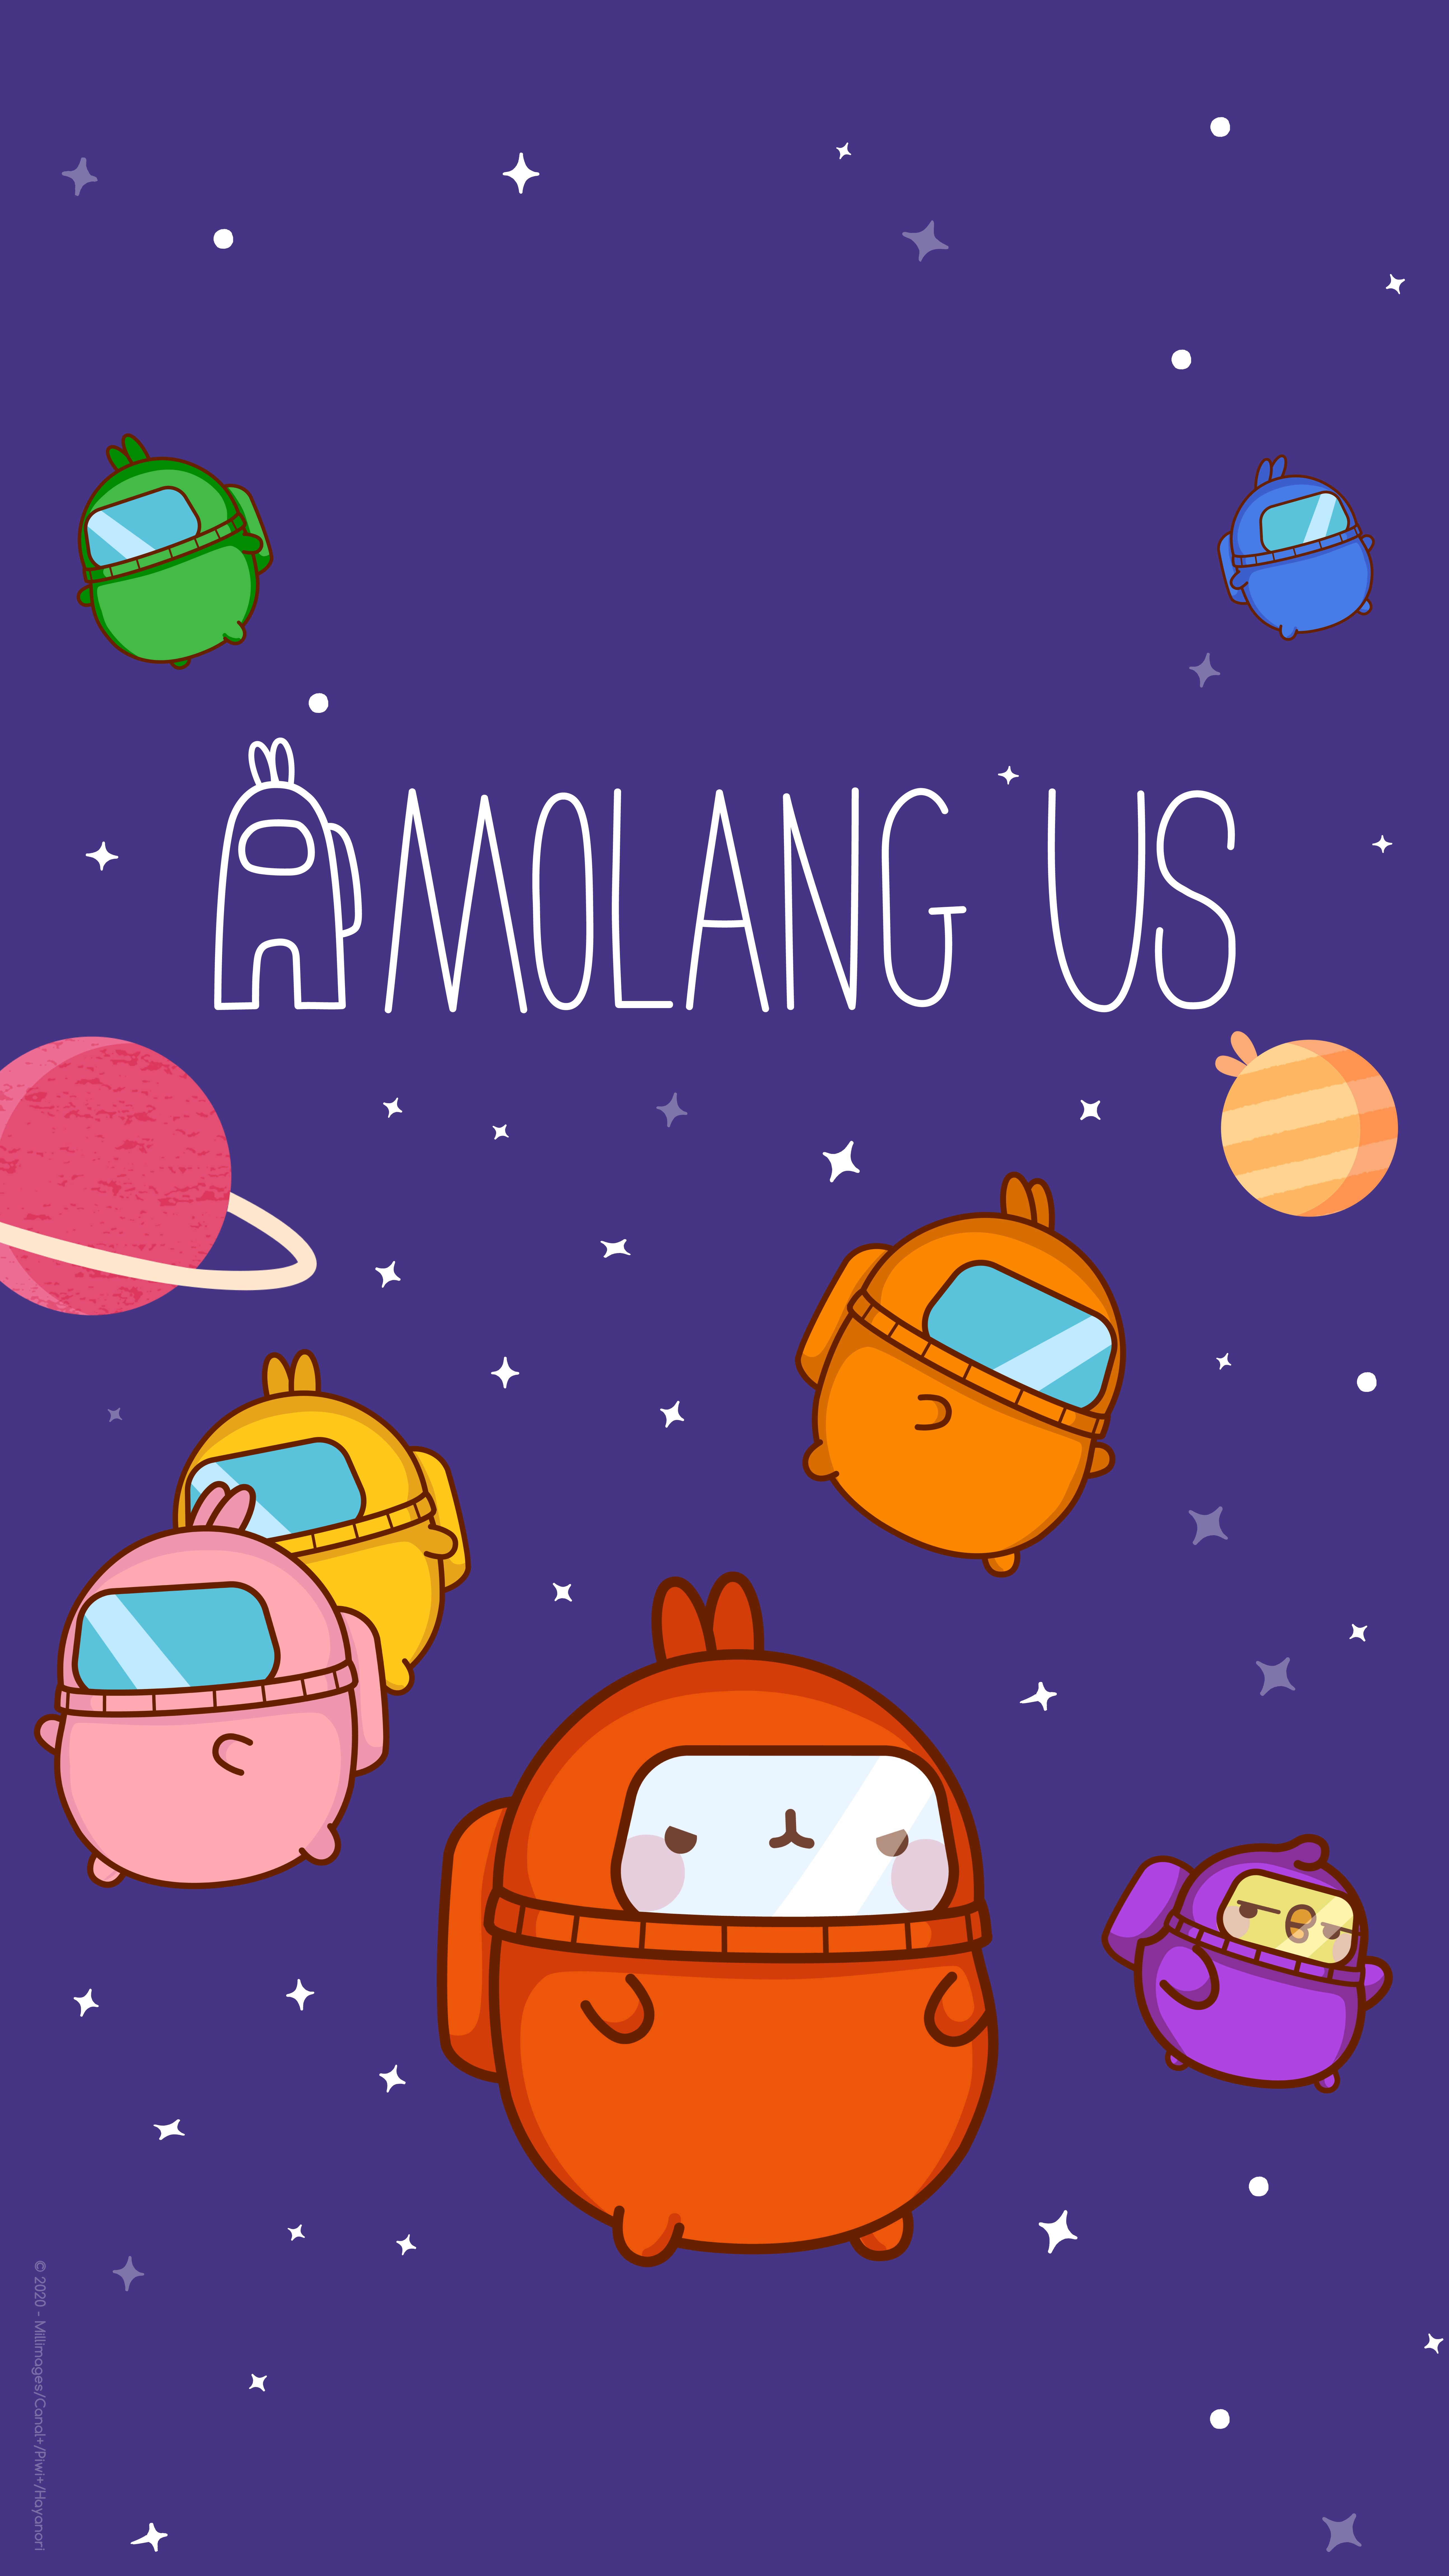 A cute Molang and friends in space - Molang, Among Us